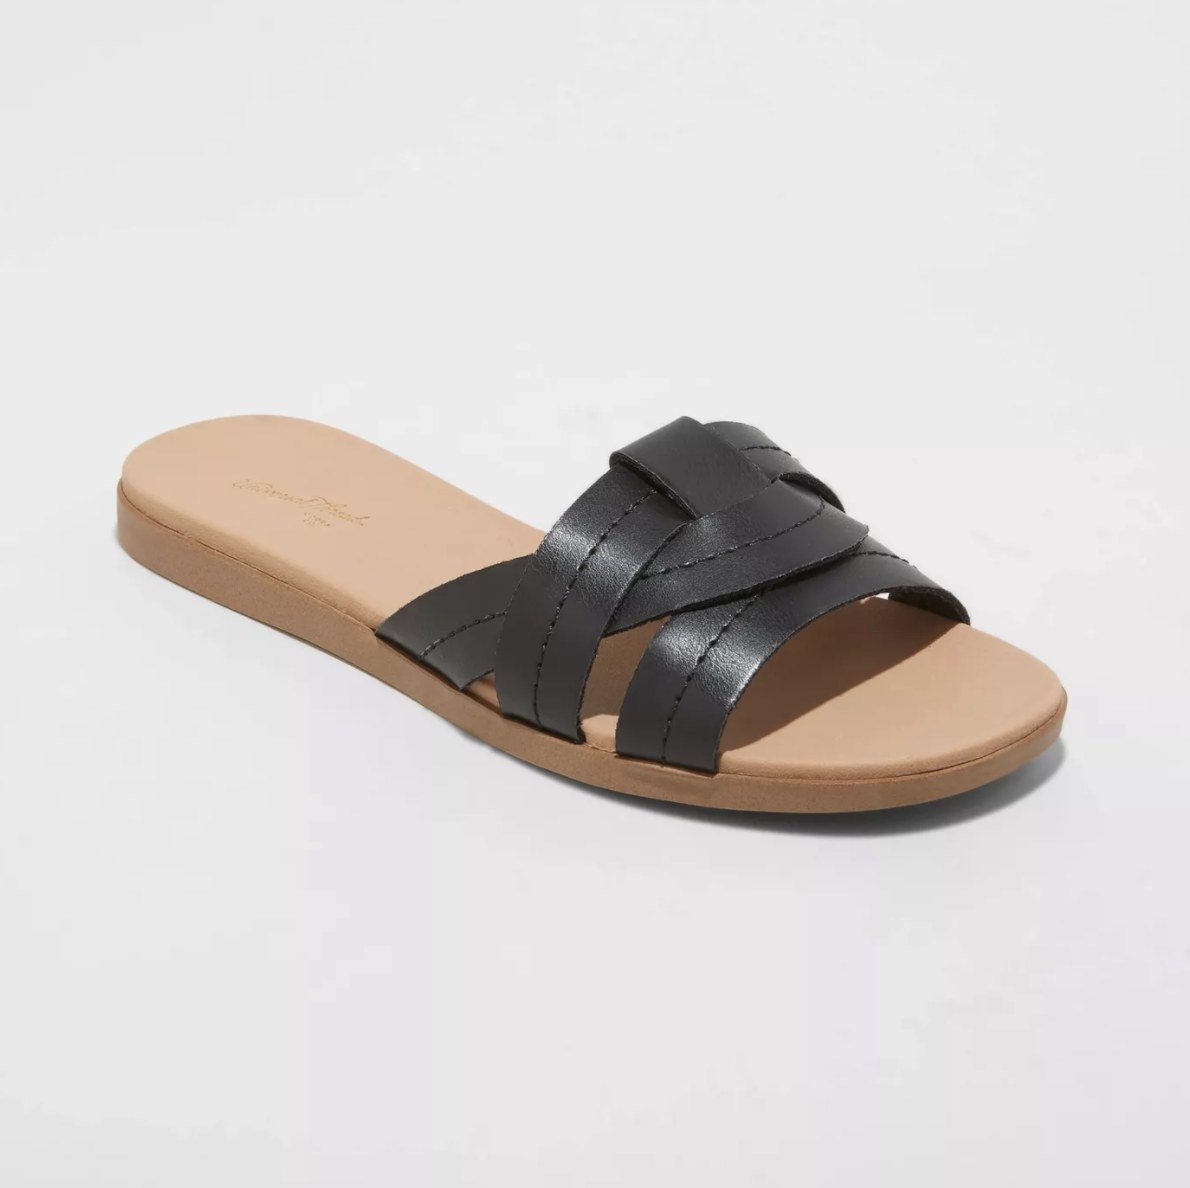 The tan sandals have three overlapping black straps over the toes